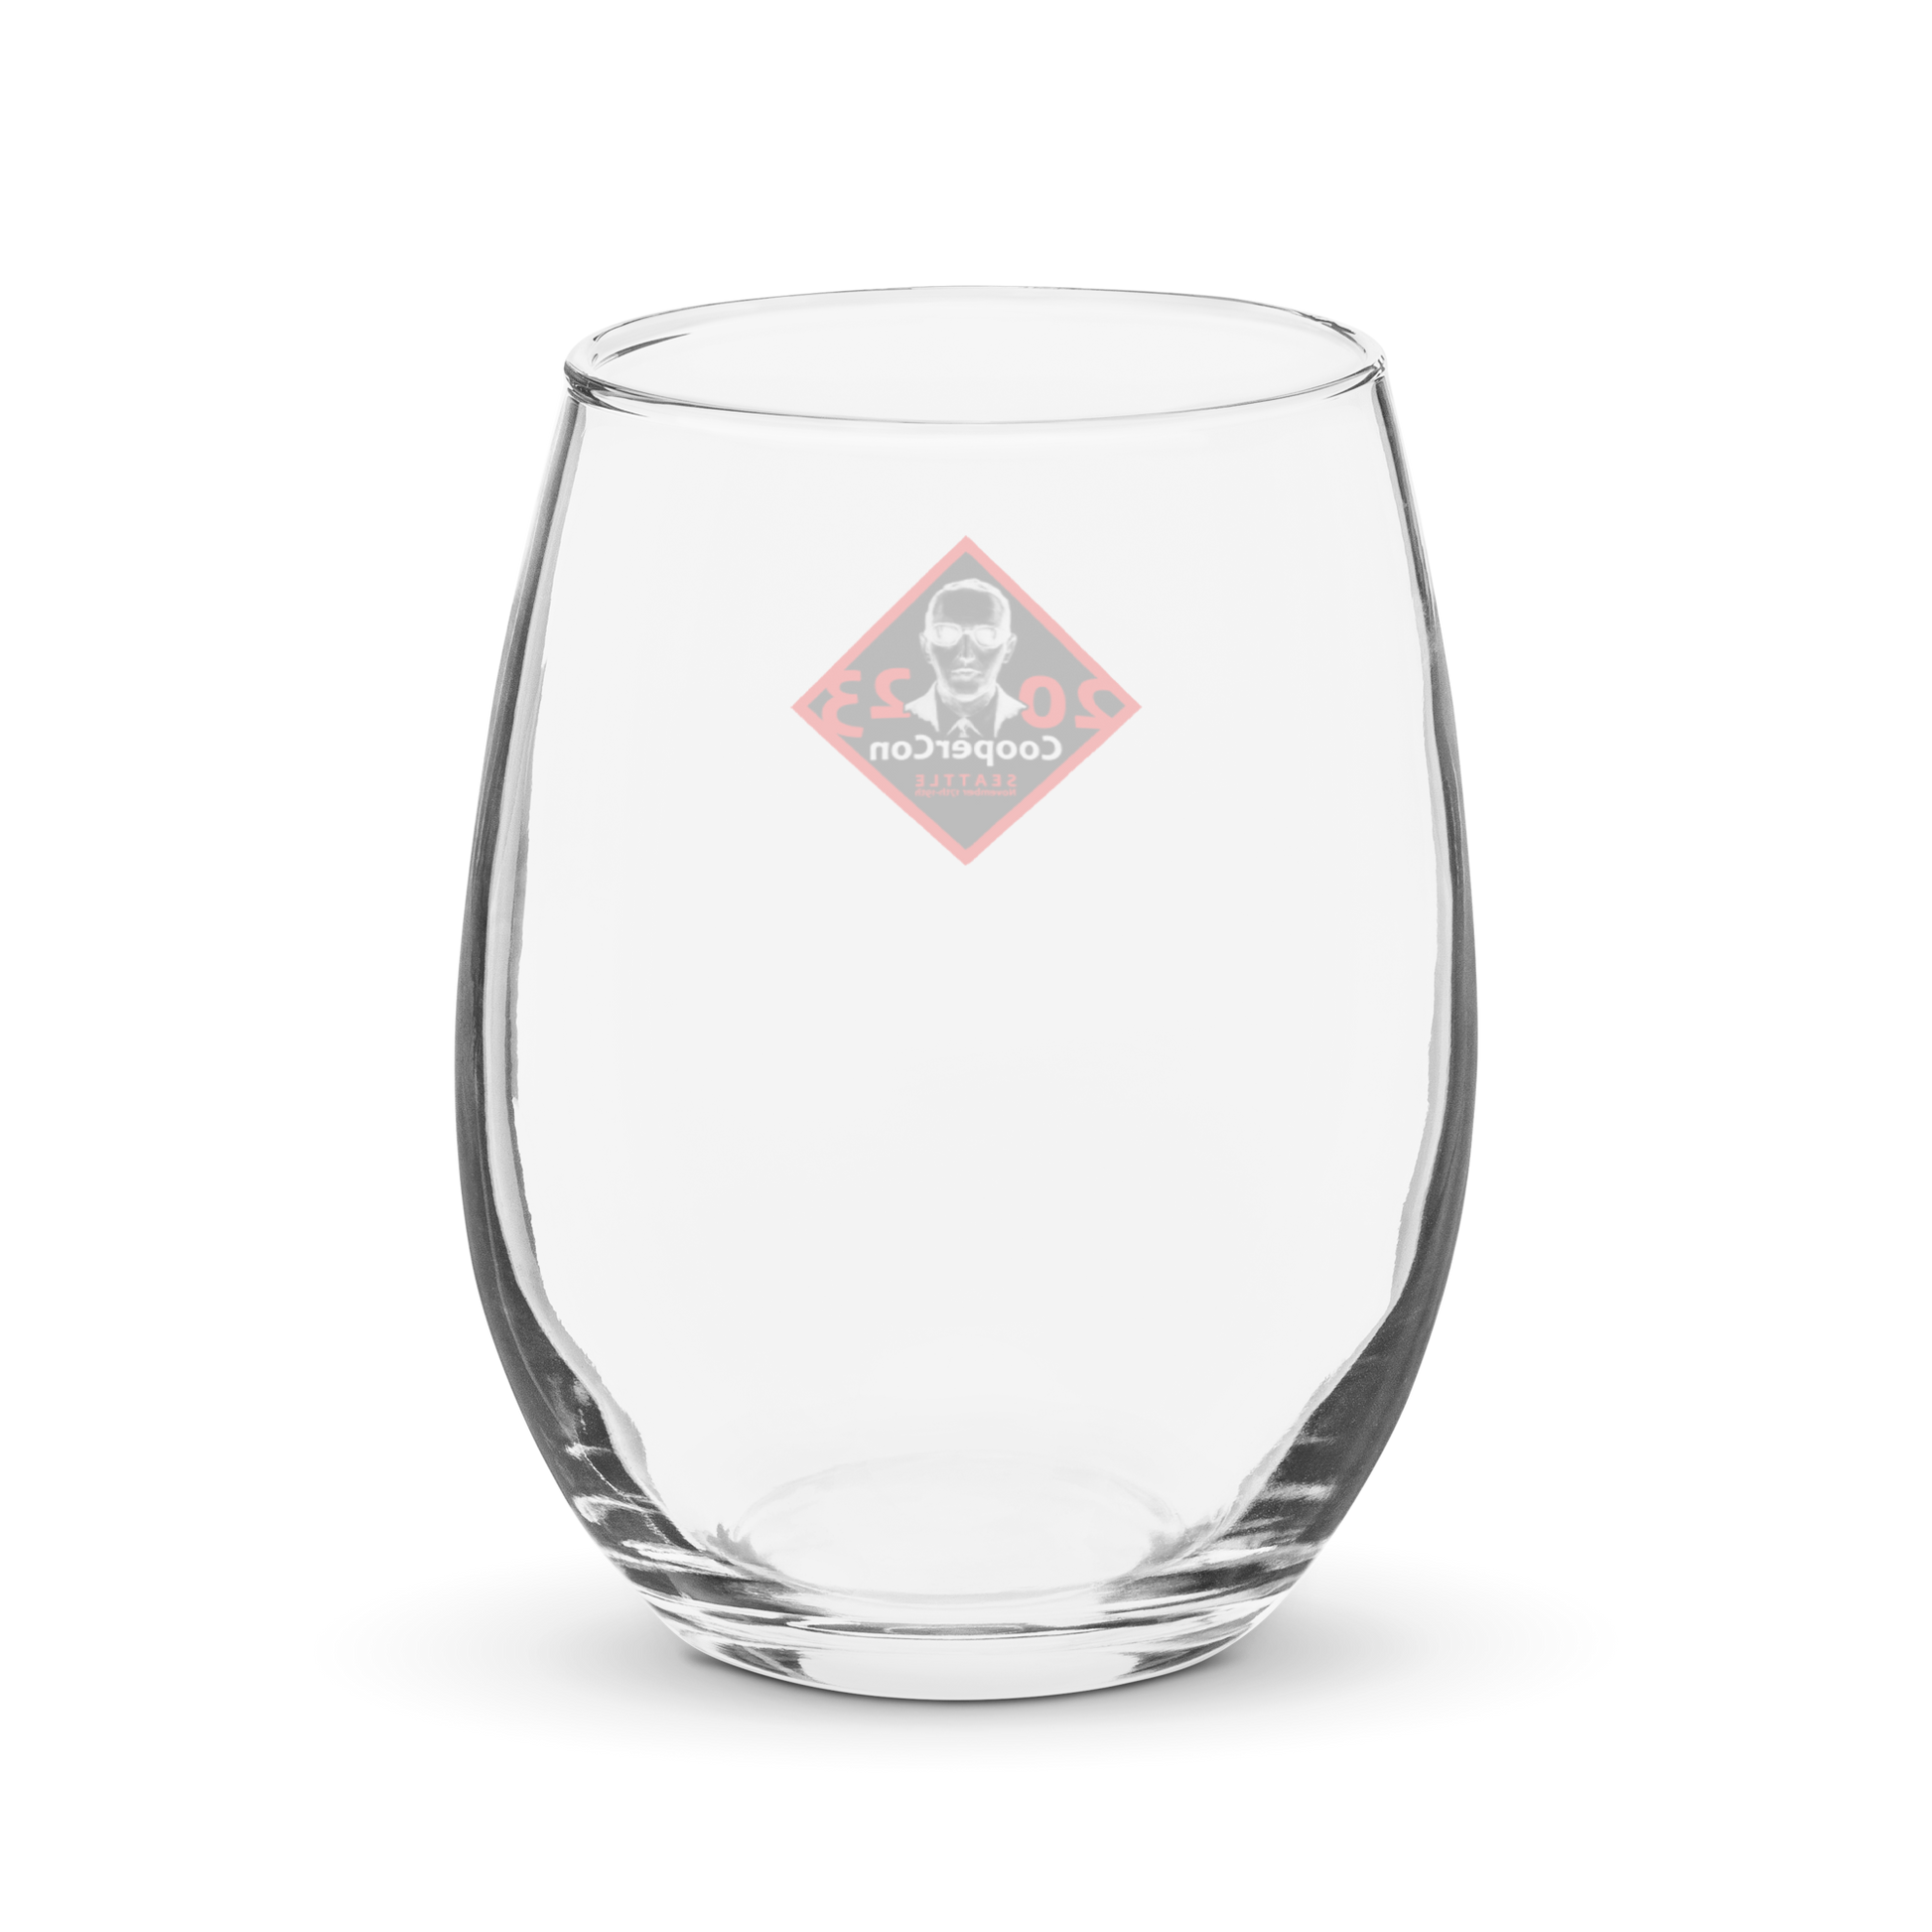 Way to Celebrate Clear Glass Stemless Wine Glass with Skull Pattern 